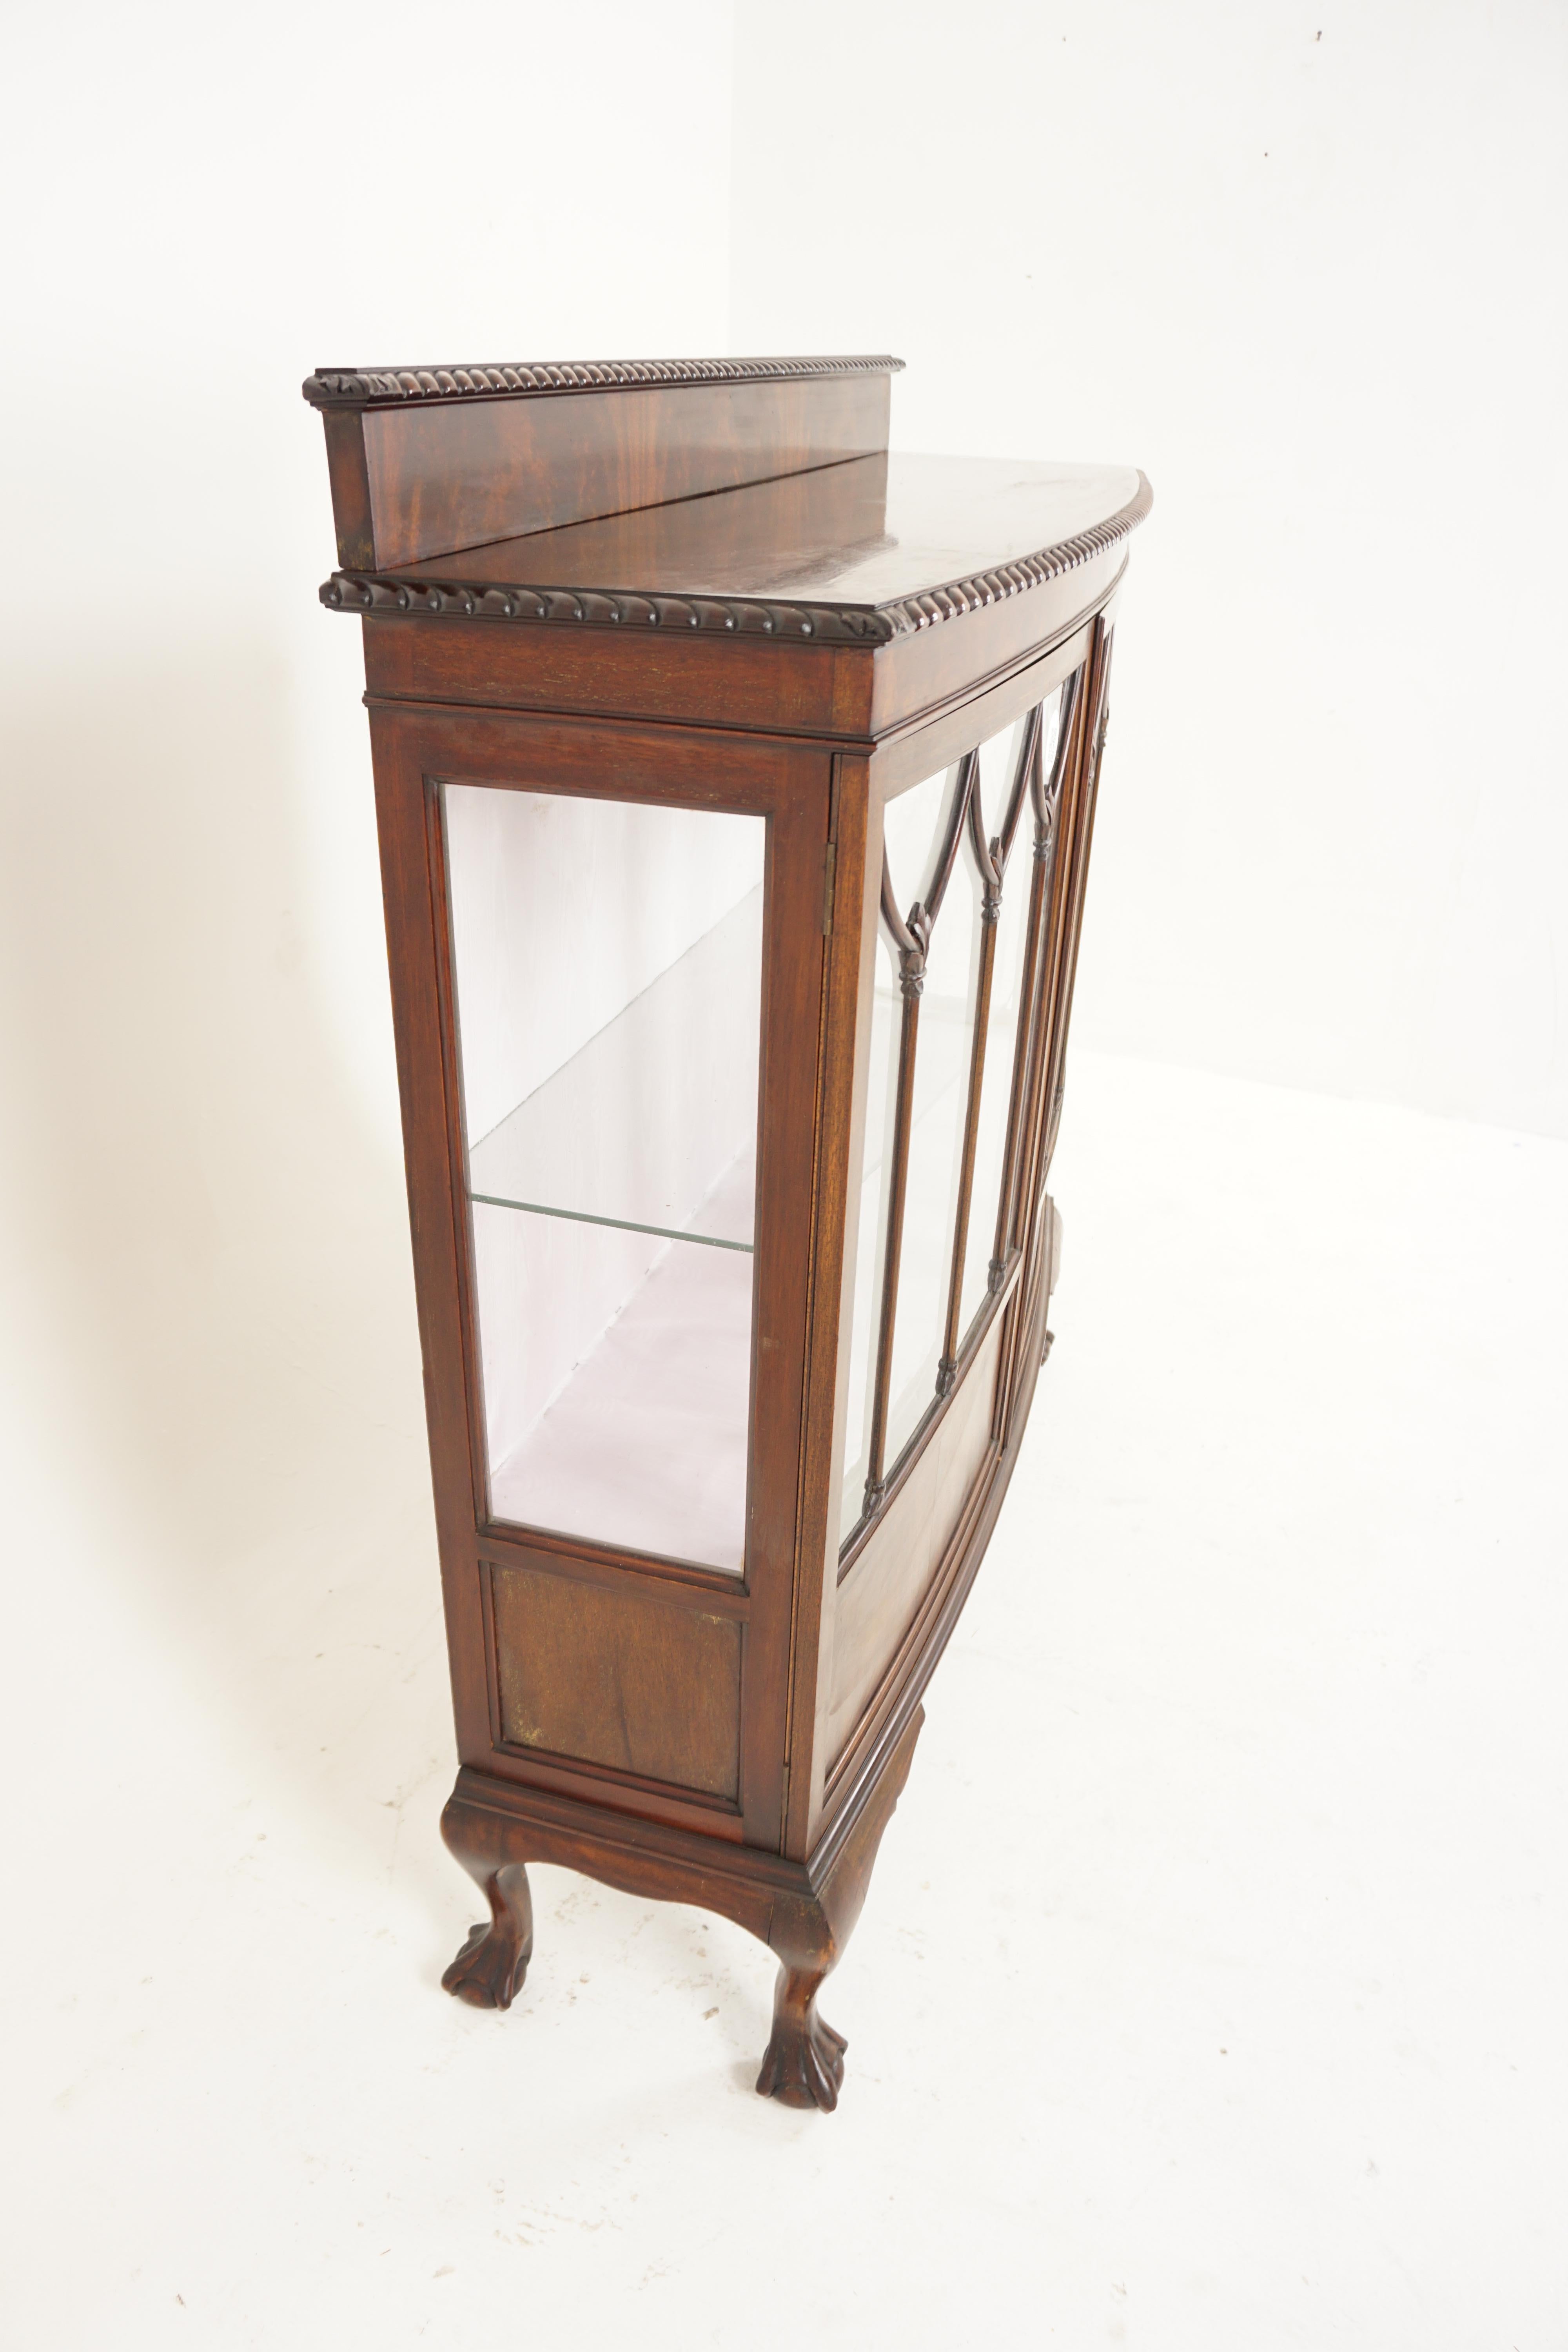 Large Ant, Walnut Bow Front Display Cabinet, China Cabinet, Scotland 1910, H807 1